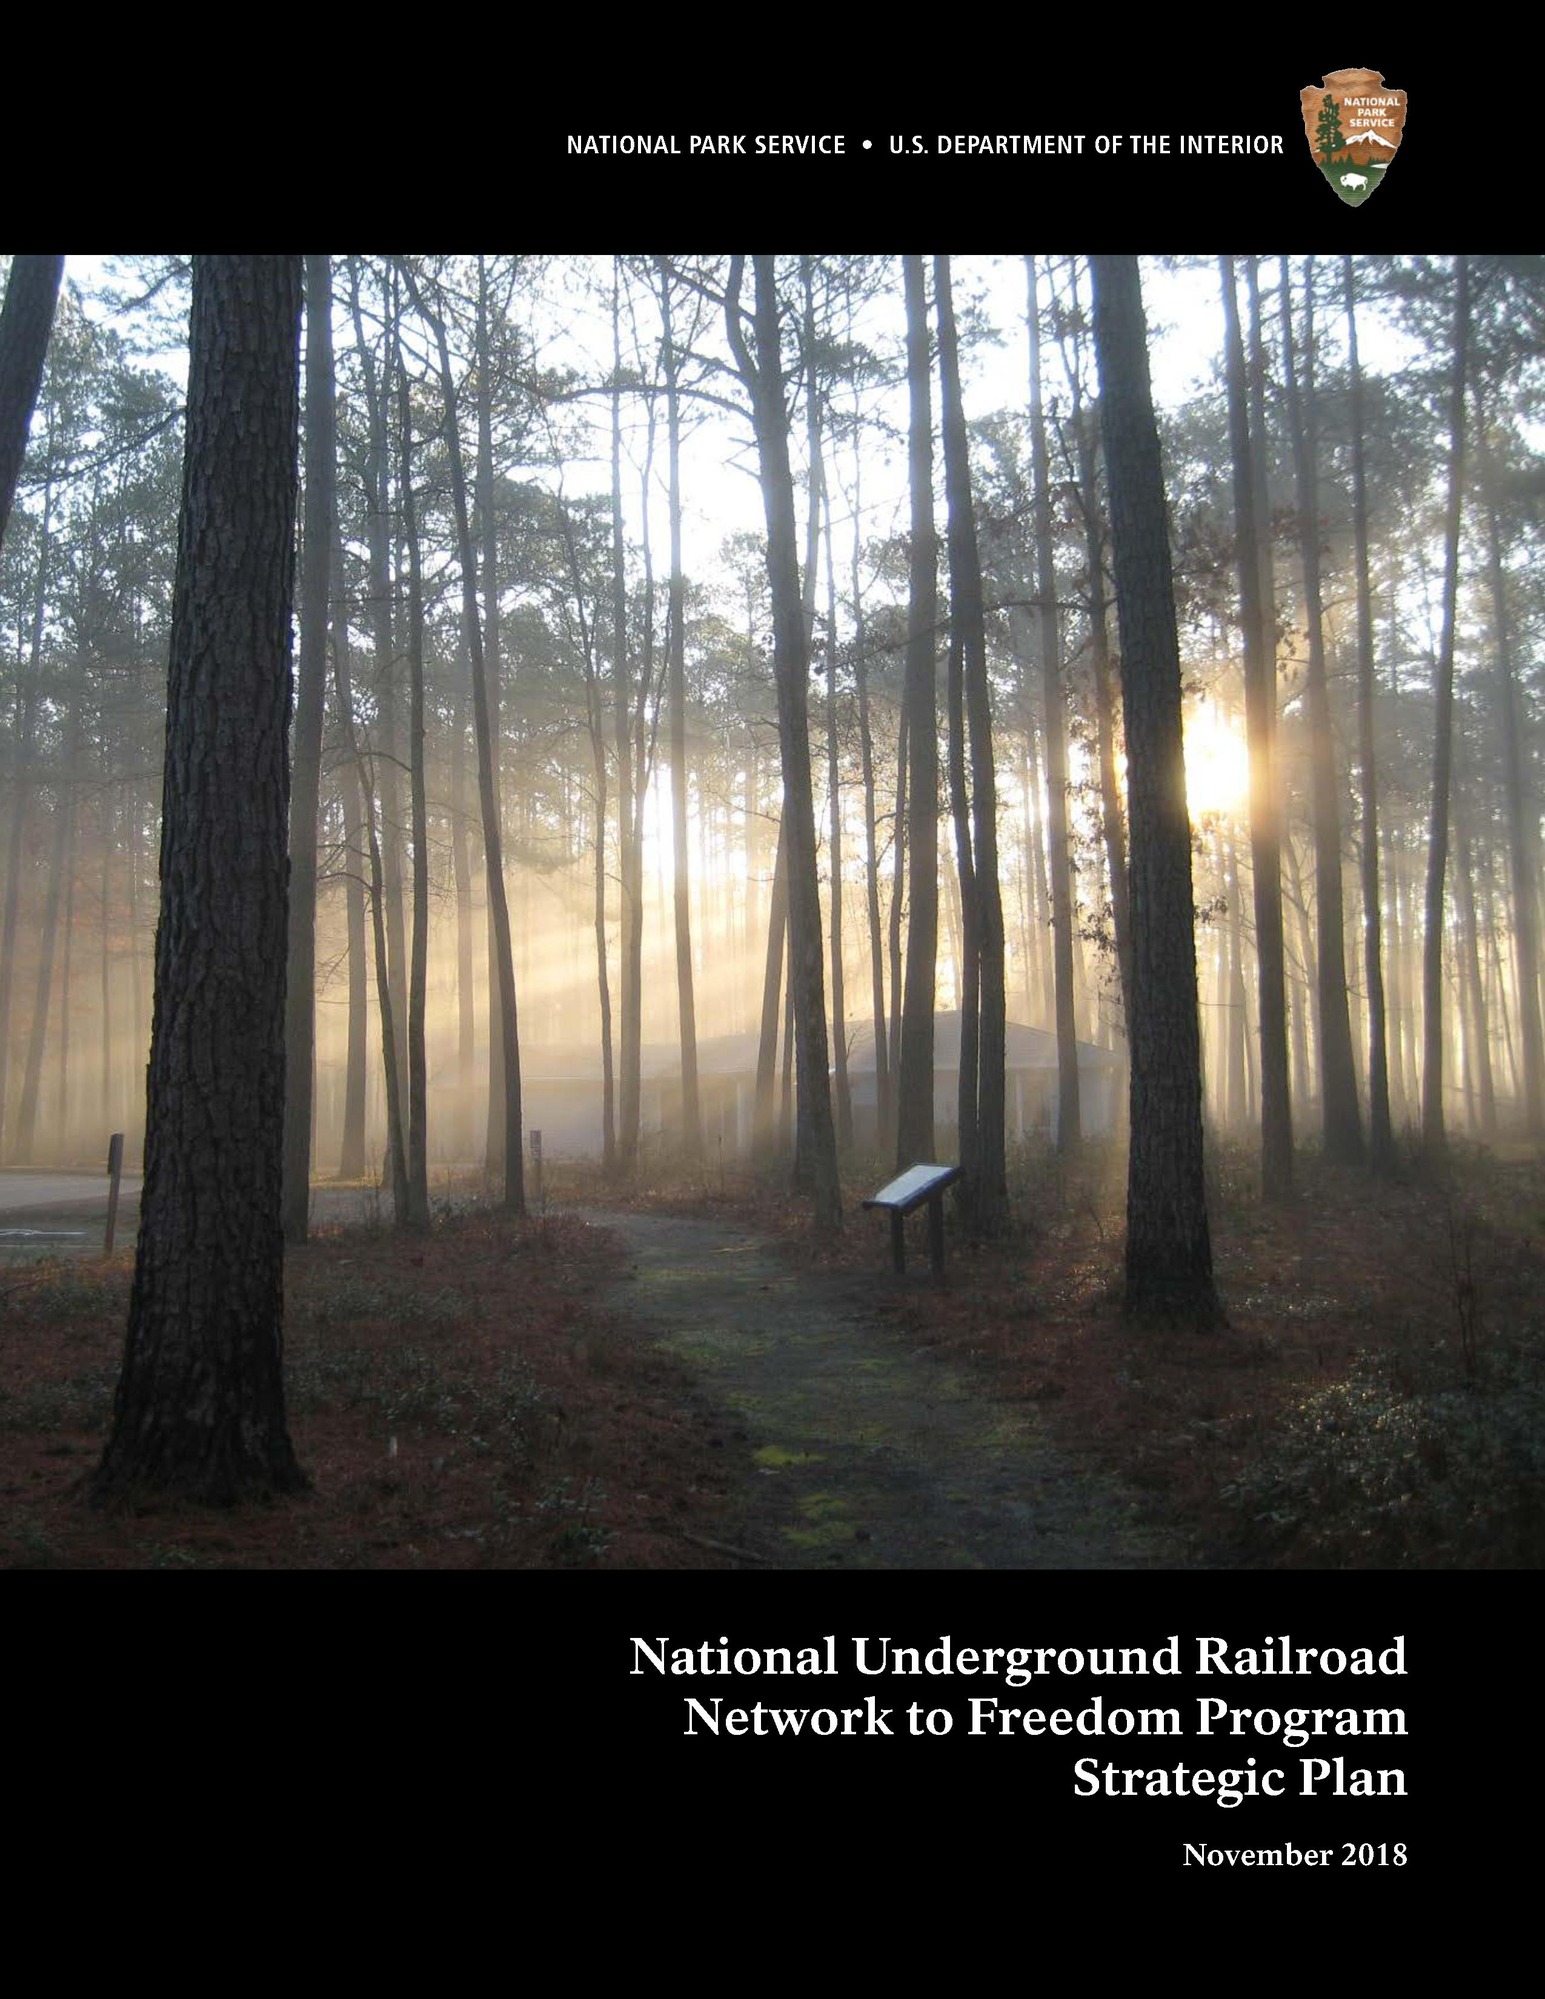 NPS Underground Railroad Network to Freedom Program awards $500,000 in  grants - Office of Communications (U.S. National Park Service)